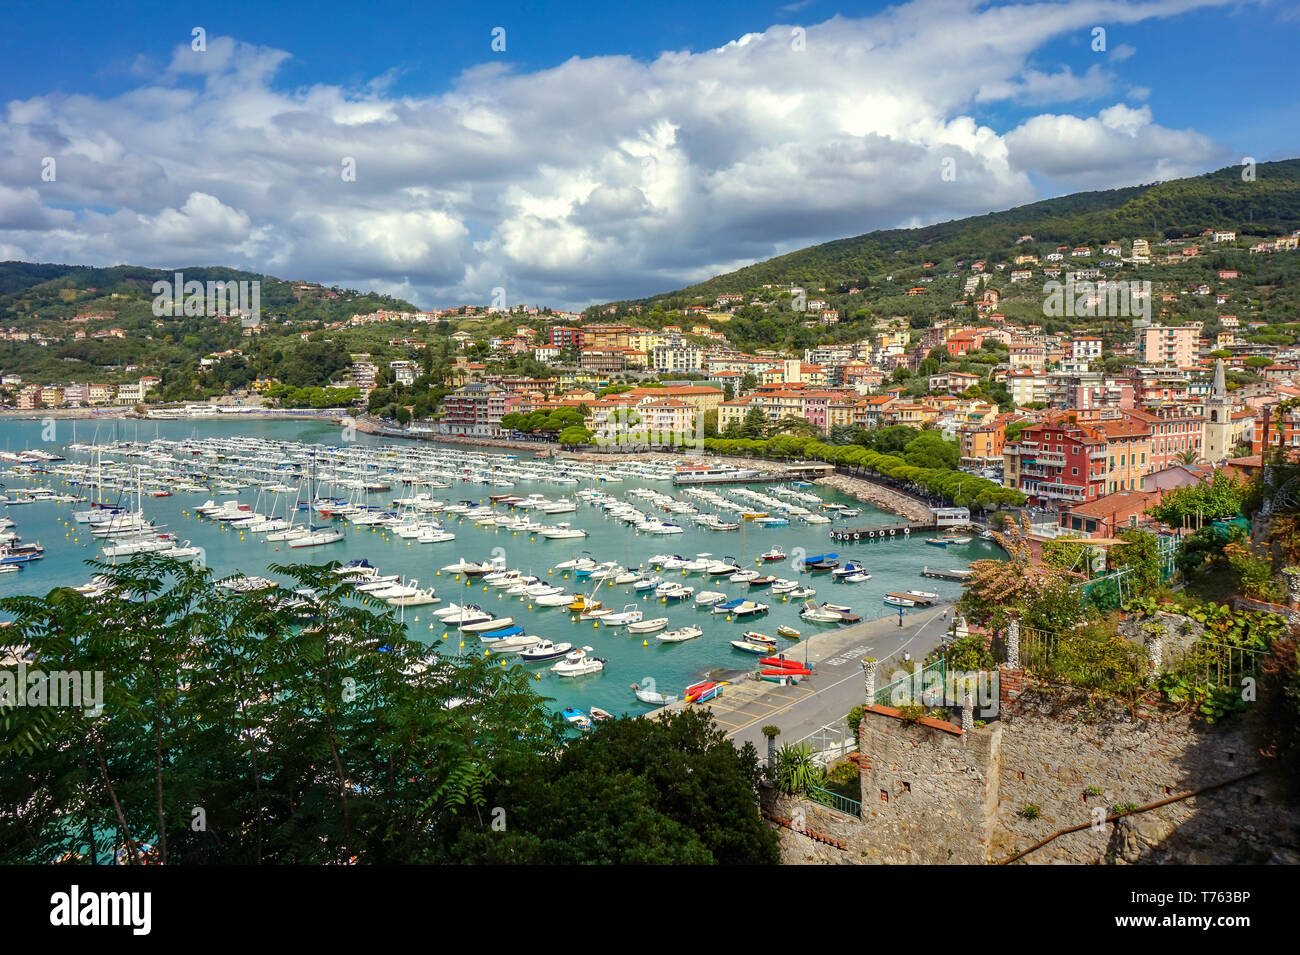 Top view of small city Lerici on Ligurian coast, Italy, in province of La Spezia. Panoramic view of Italian town Lerici. A lot of boat in harbor and c Stock Photo